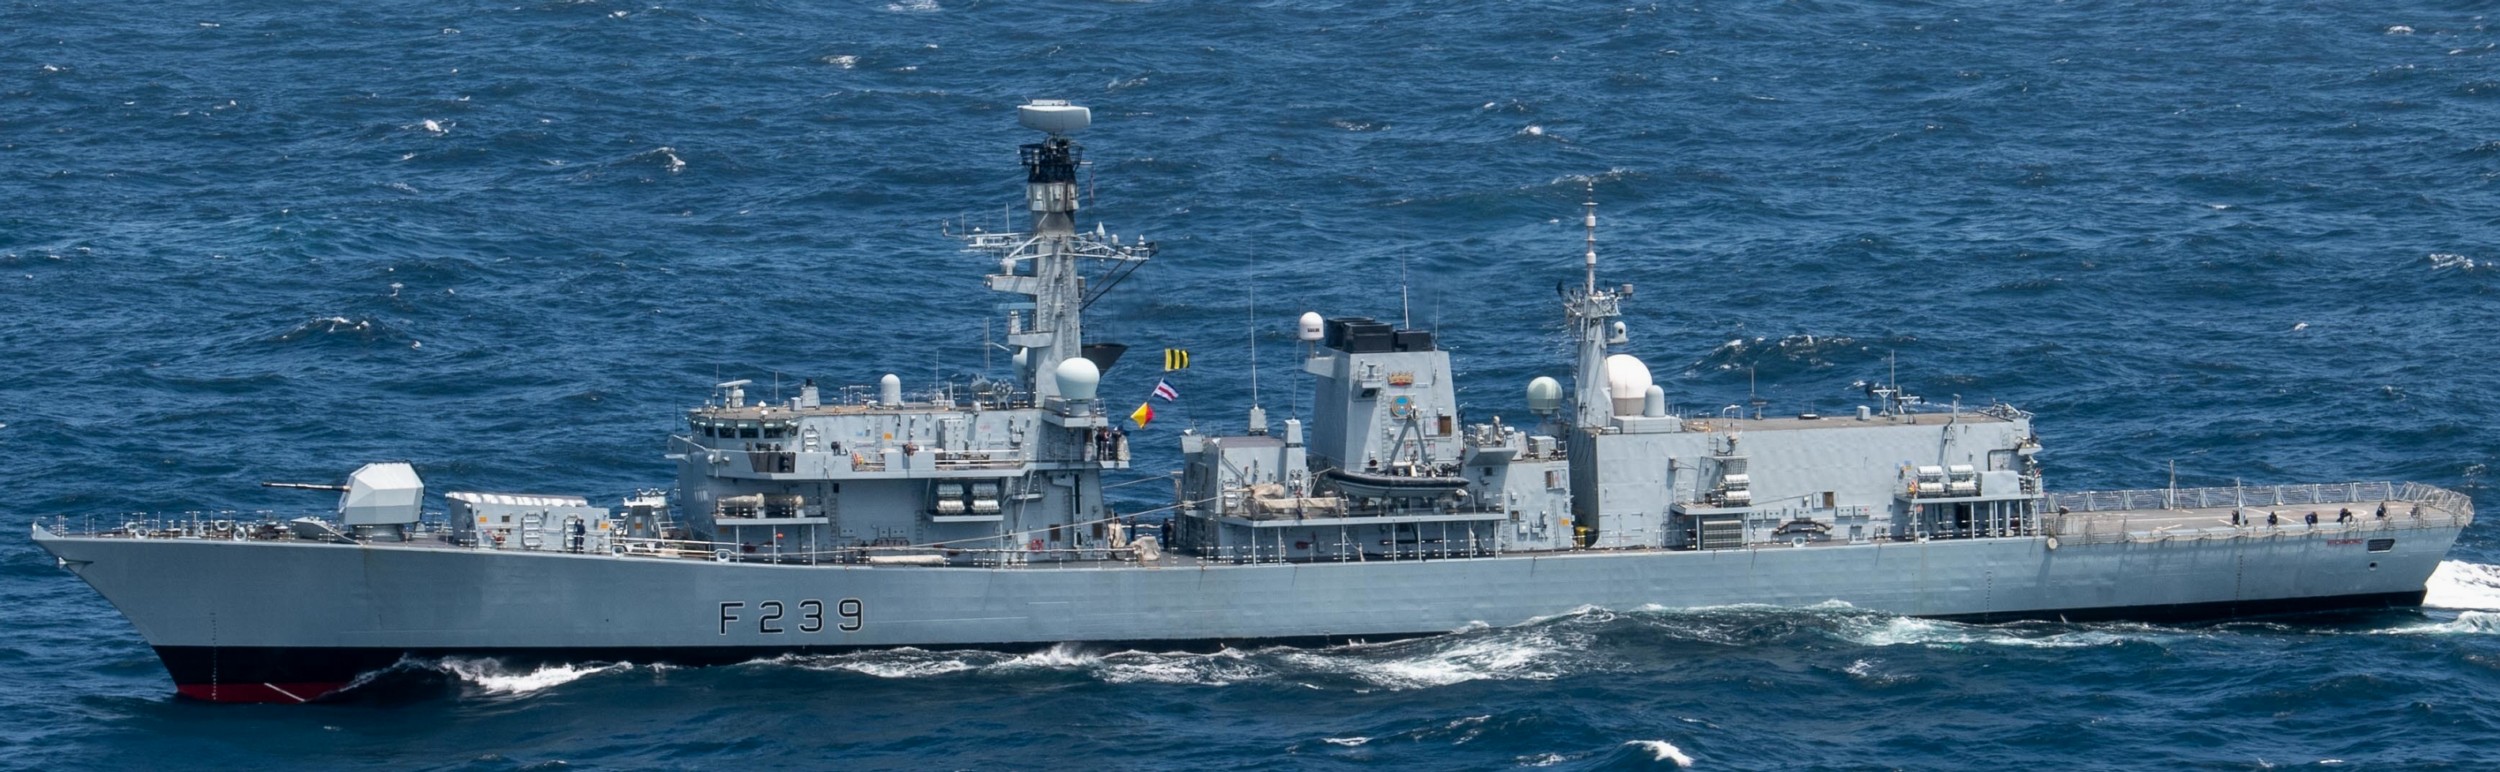 f-239 hms richmond type 23 duke class guided missile frigate ffg royal navy 43